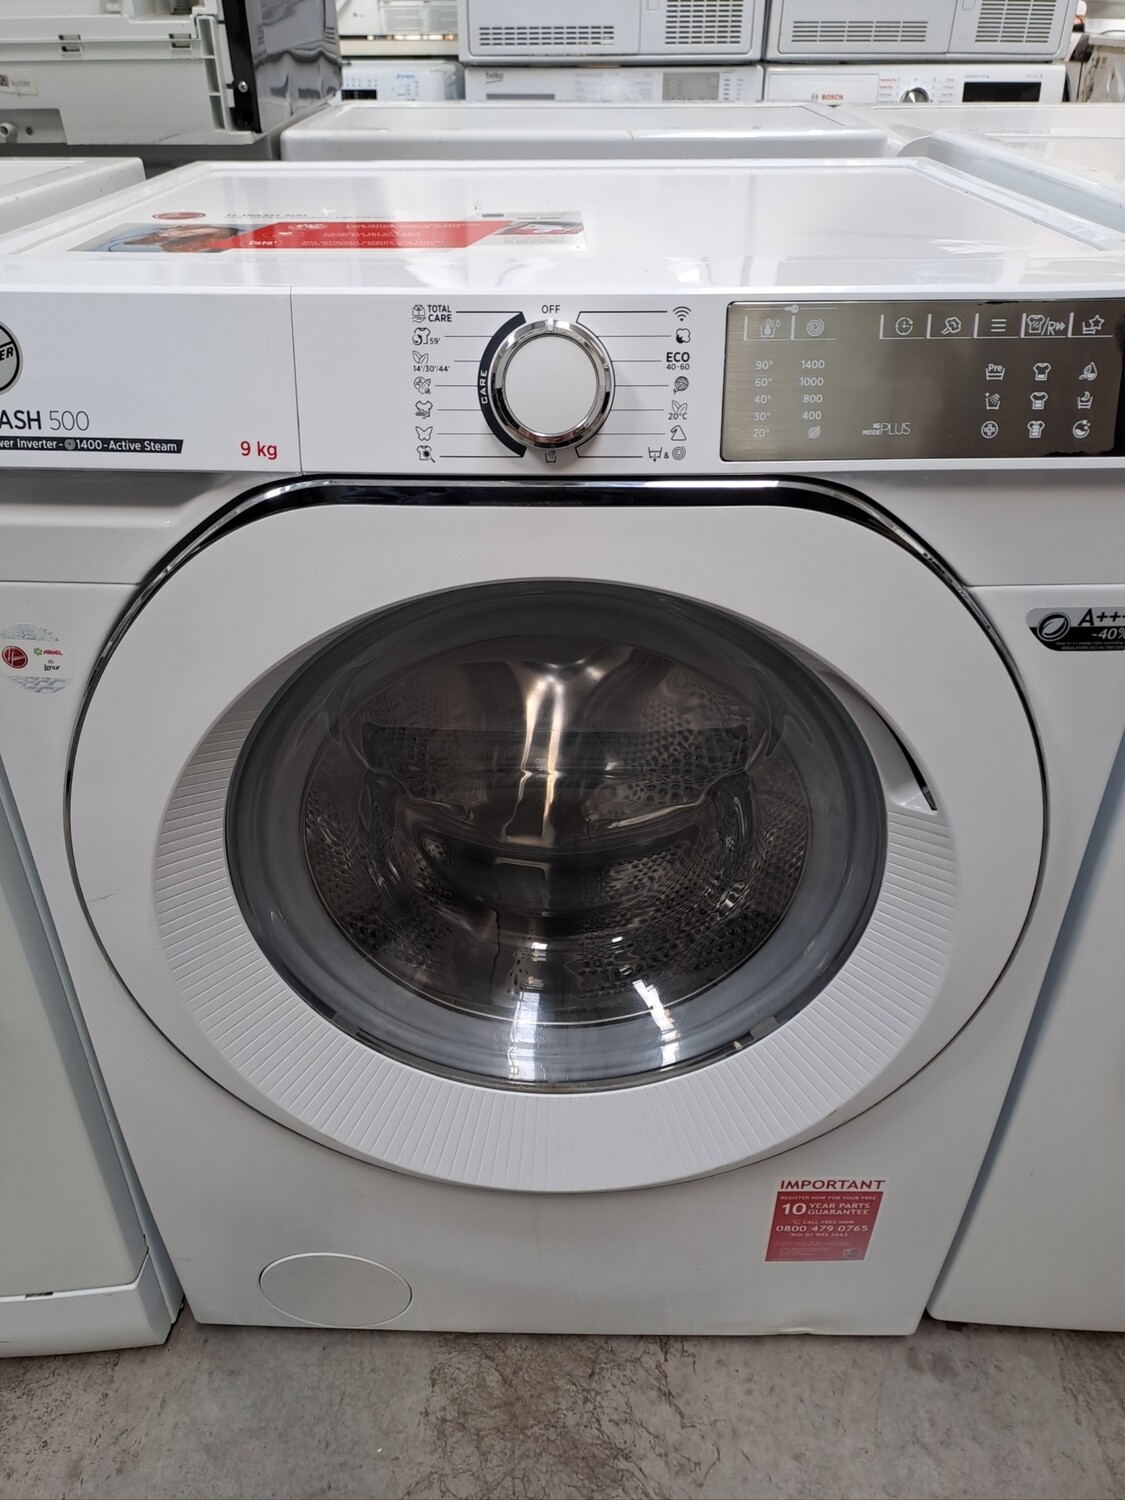 Hoover HWB49AMC/1-80 H-Wash 9kg 1400 Spin Washing Machine - White - Refurbished + 6 Month Guarantee. This item is located in our Whitby Road Shop 